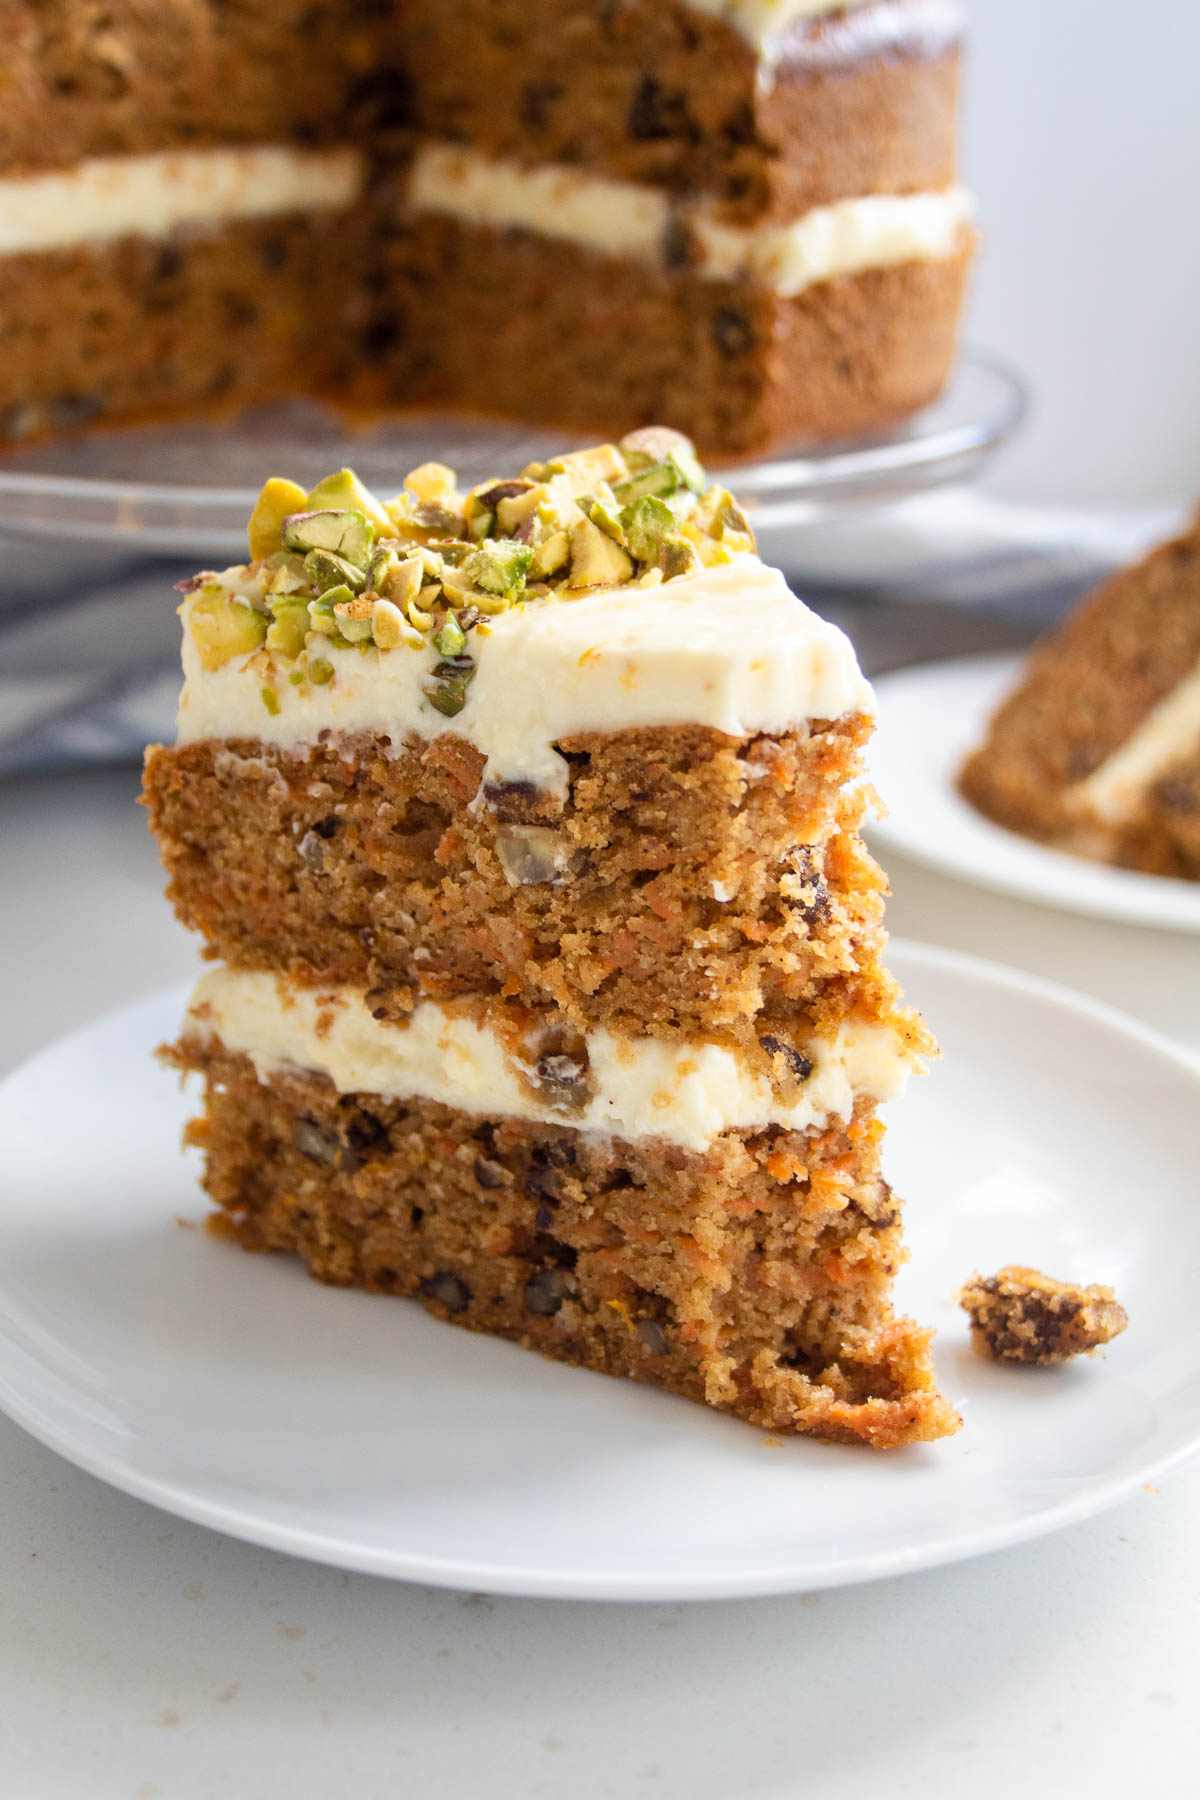 a slice of sugar free carrot cake with a piece taken from the front.